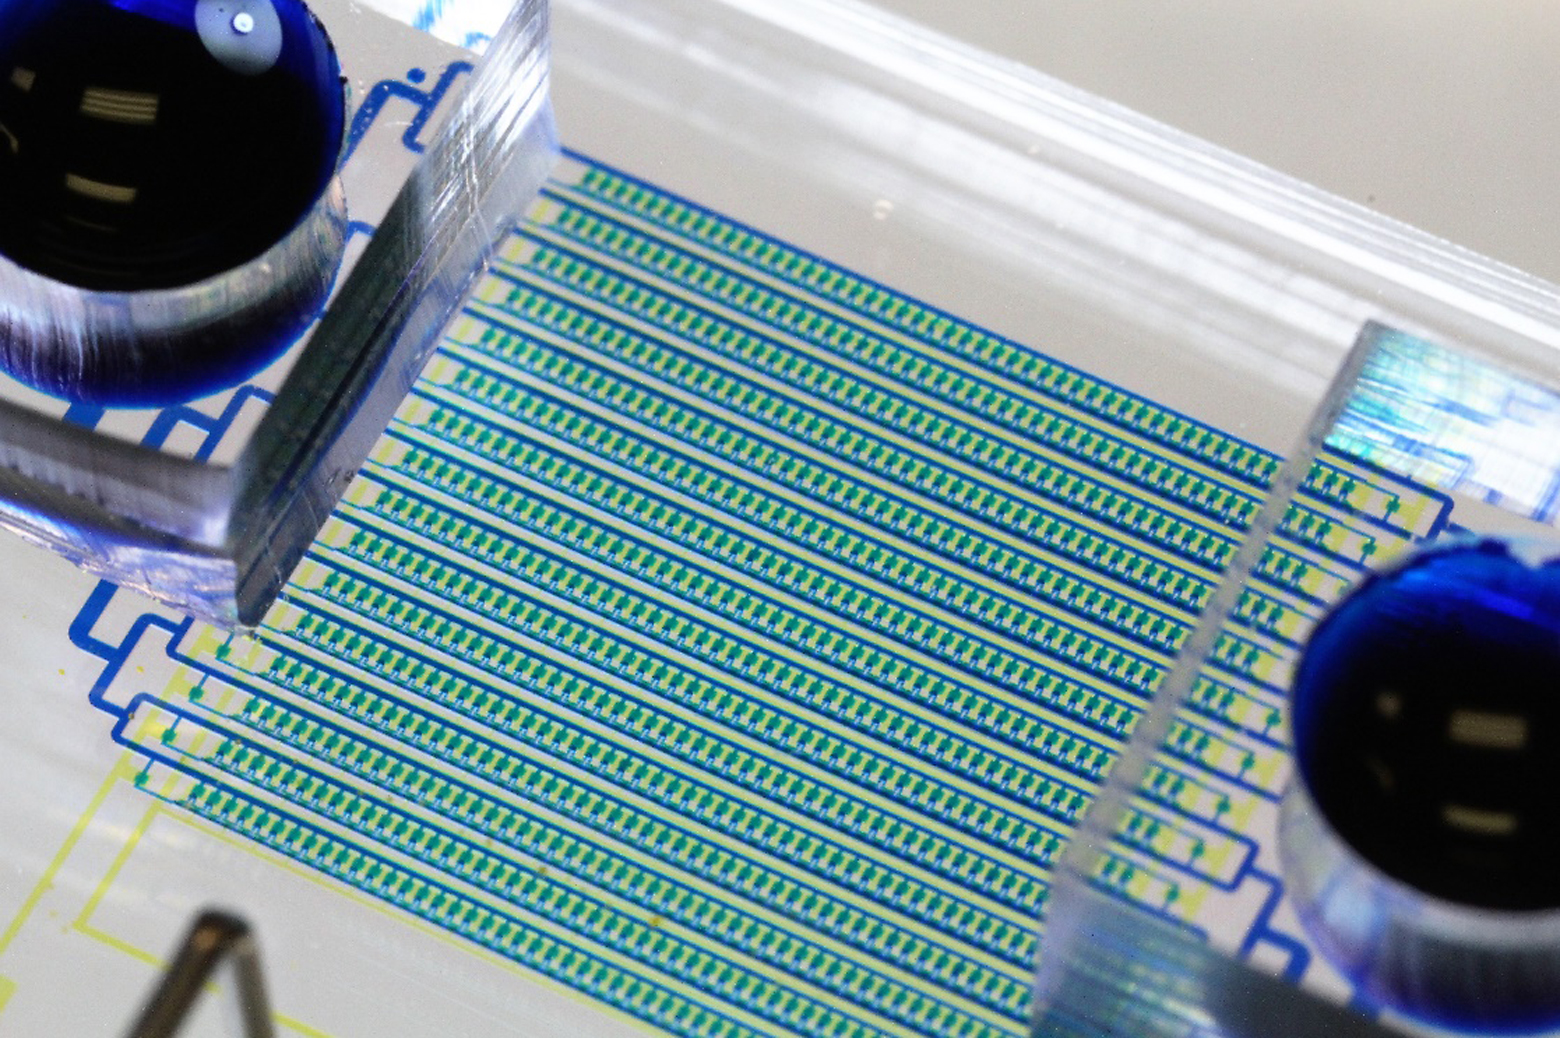 A new microfluidic chip designed to catch circulating tumor cells